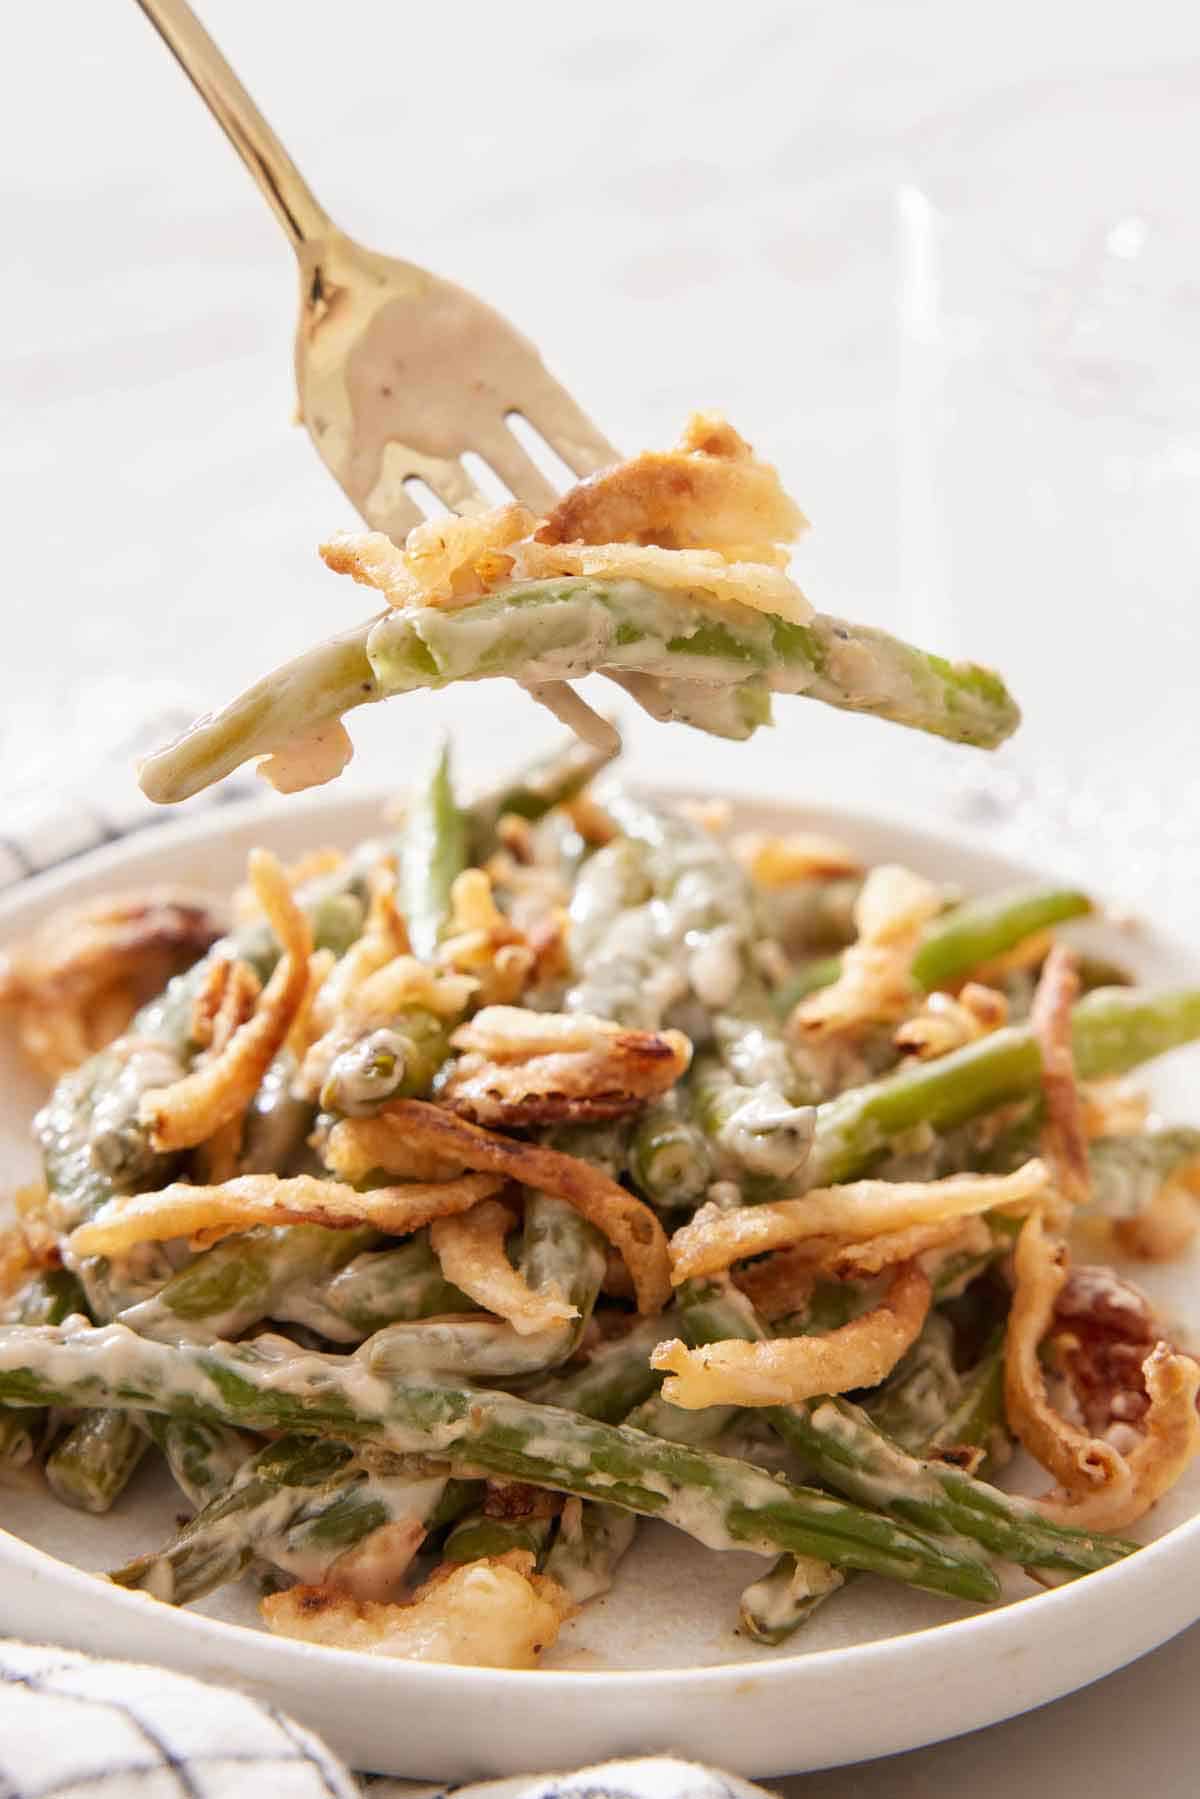 A forkful of green bean casserole lifted from a plate.